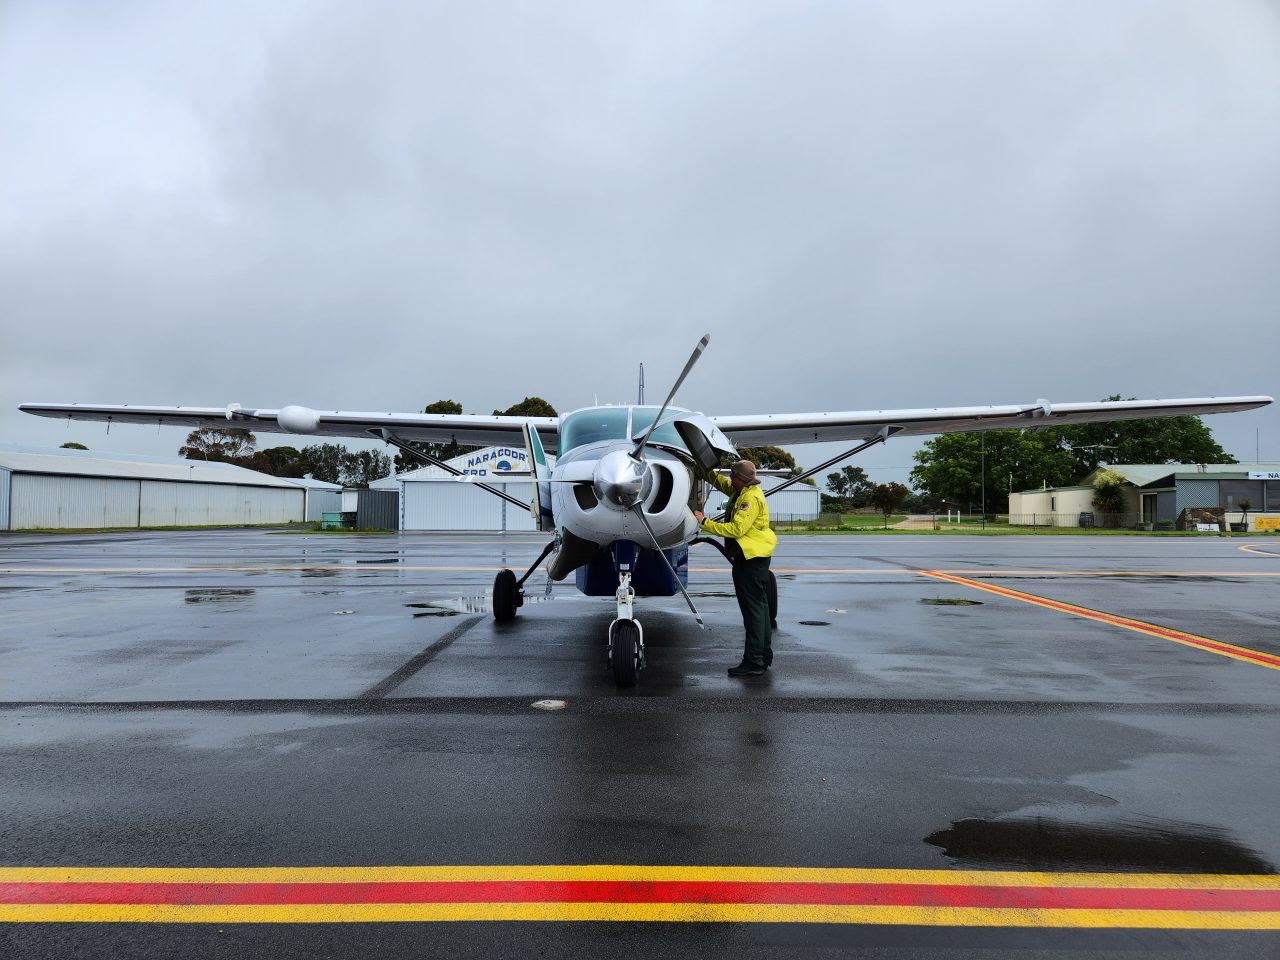 Photo of light aircraft on tarmac being checked by pilot. The sky is grey and the ground is wet